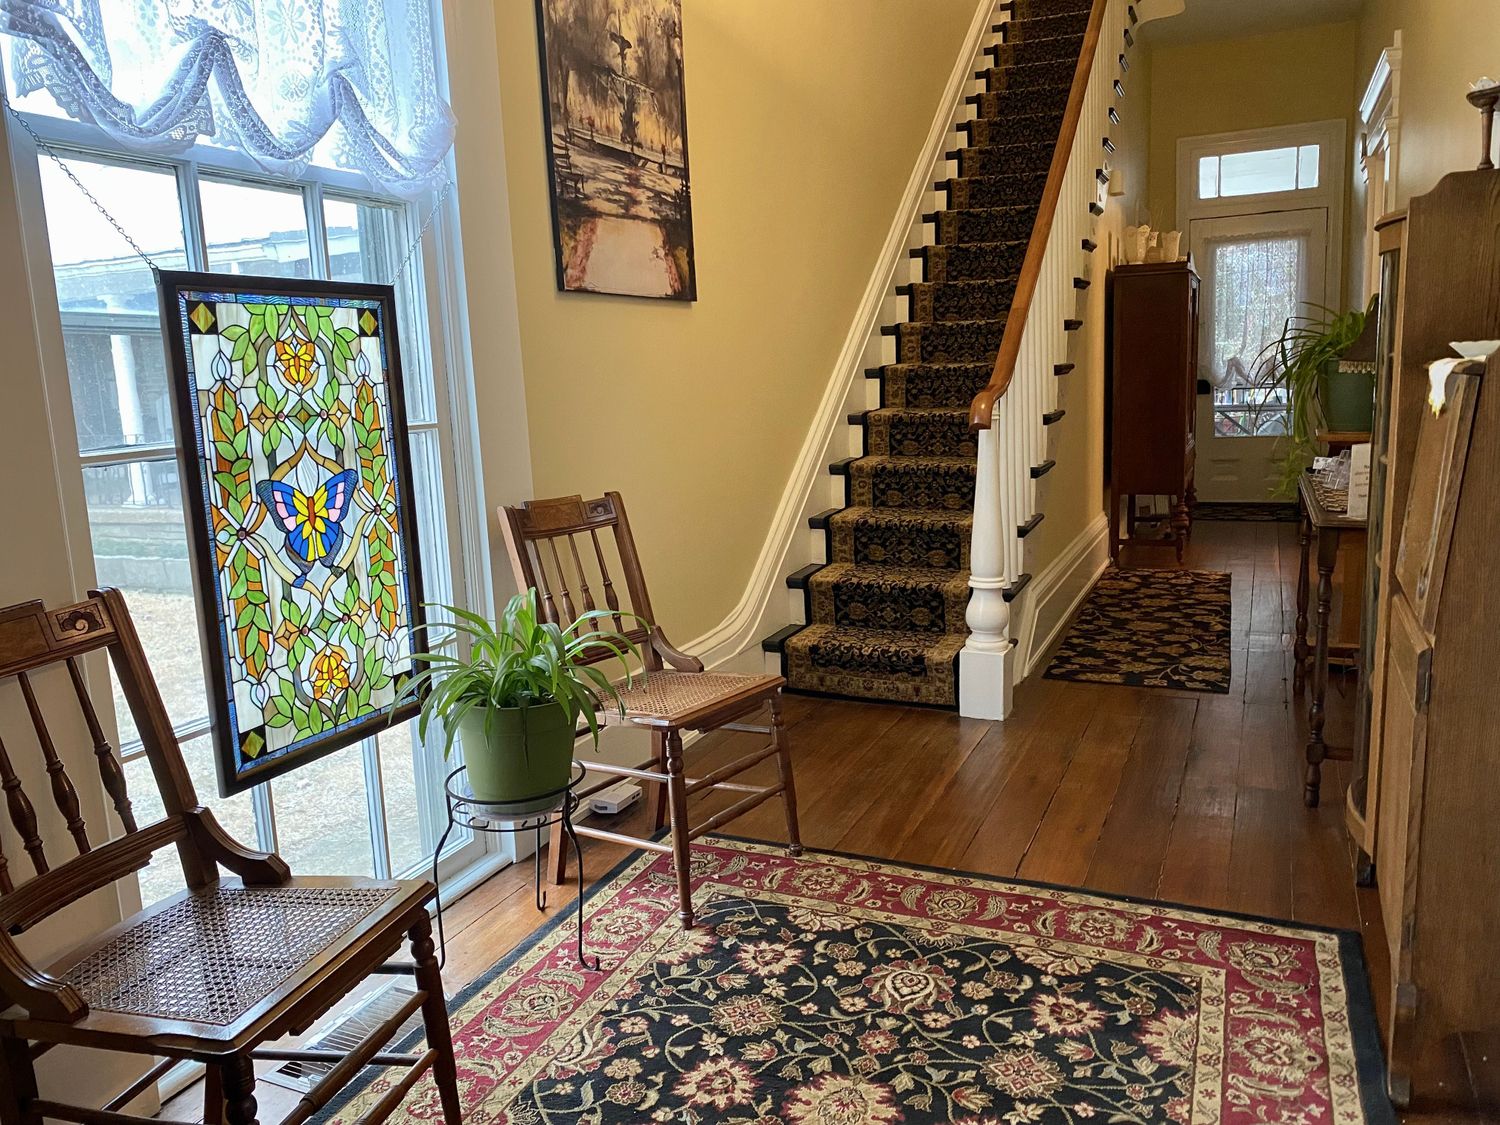 Gallery Photo of Individual, couple, and marriage counseling in a warm and cozy home setting. 618 E. 2nd St. Madison IN 47250 Chrysalis Connections, LLC 